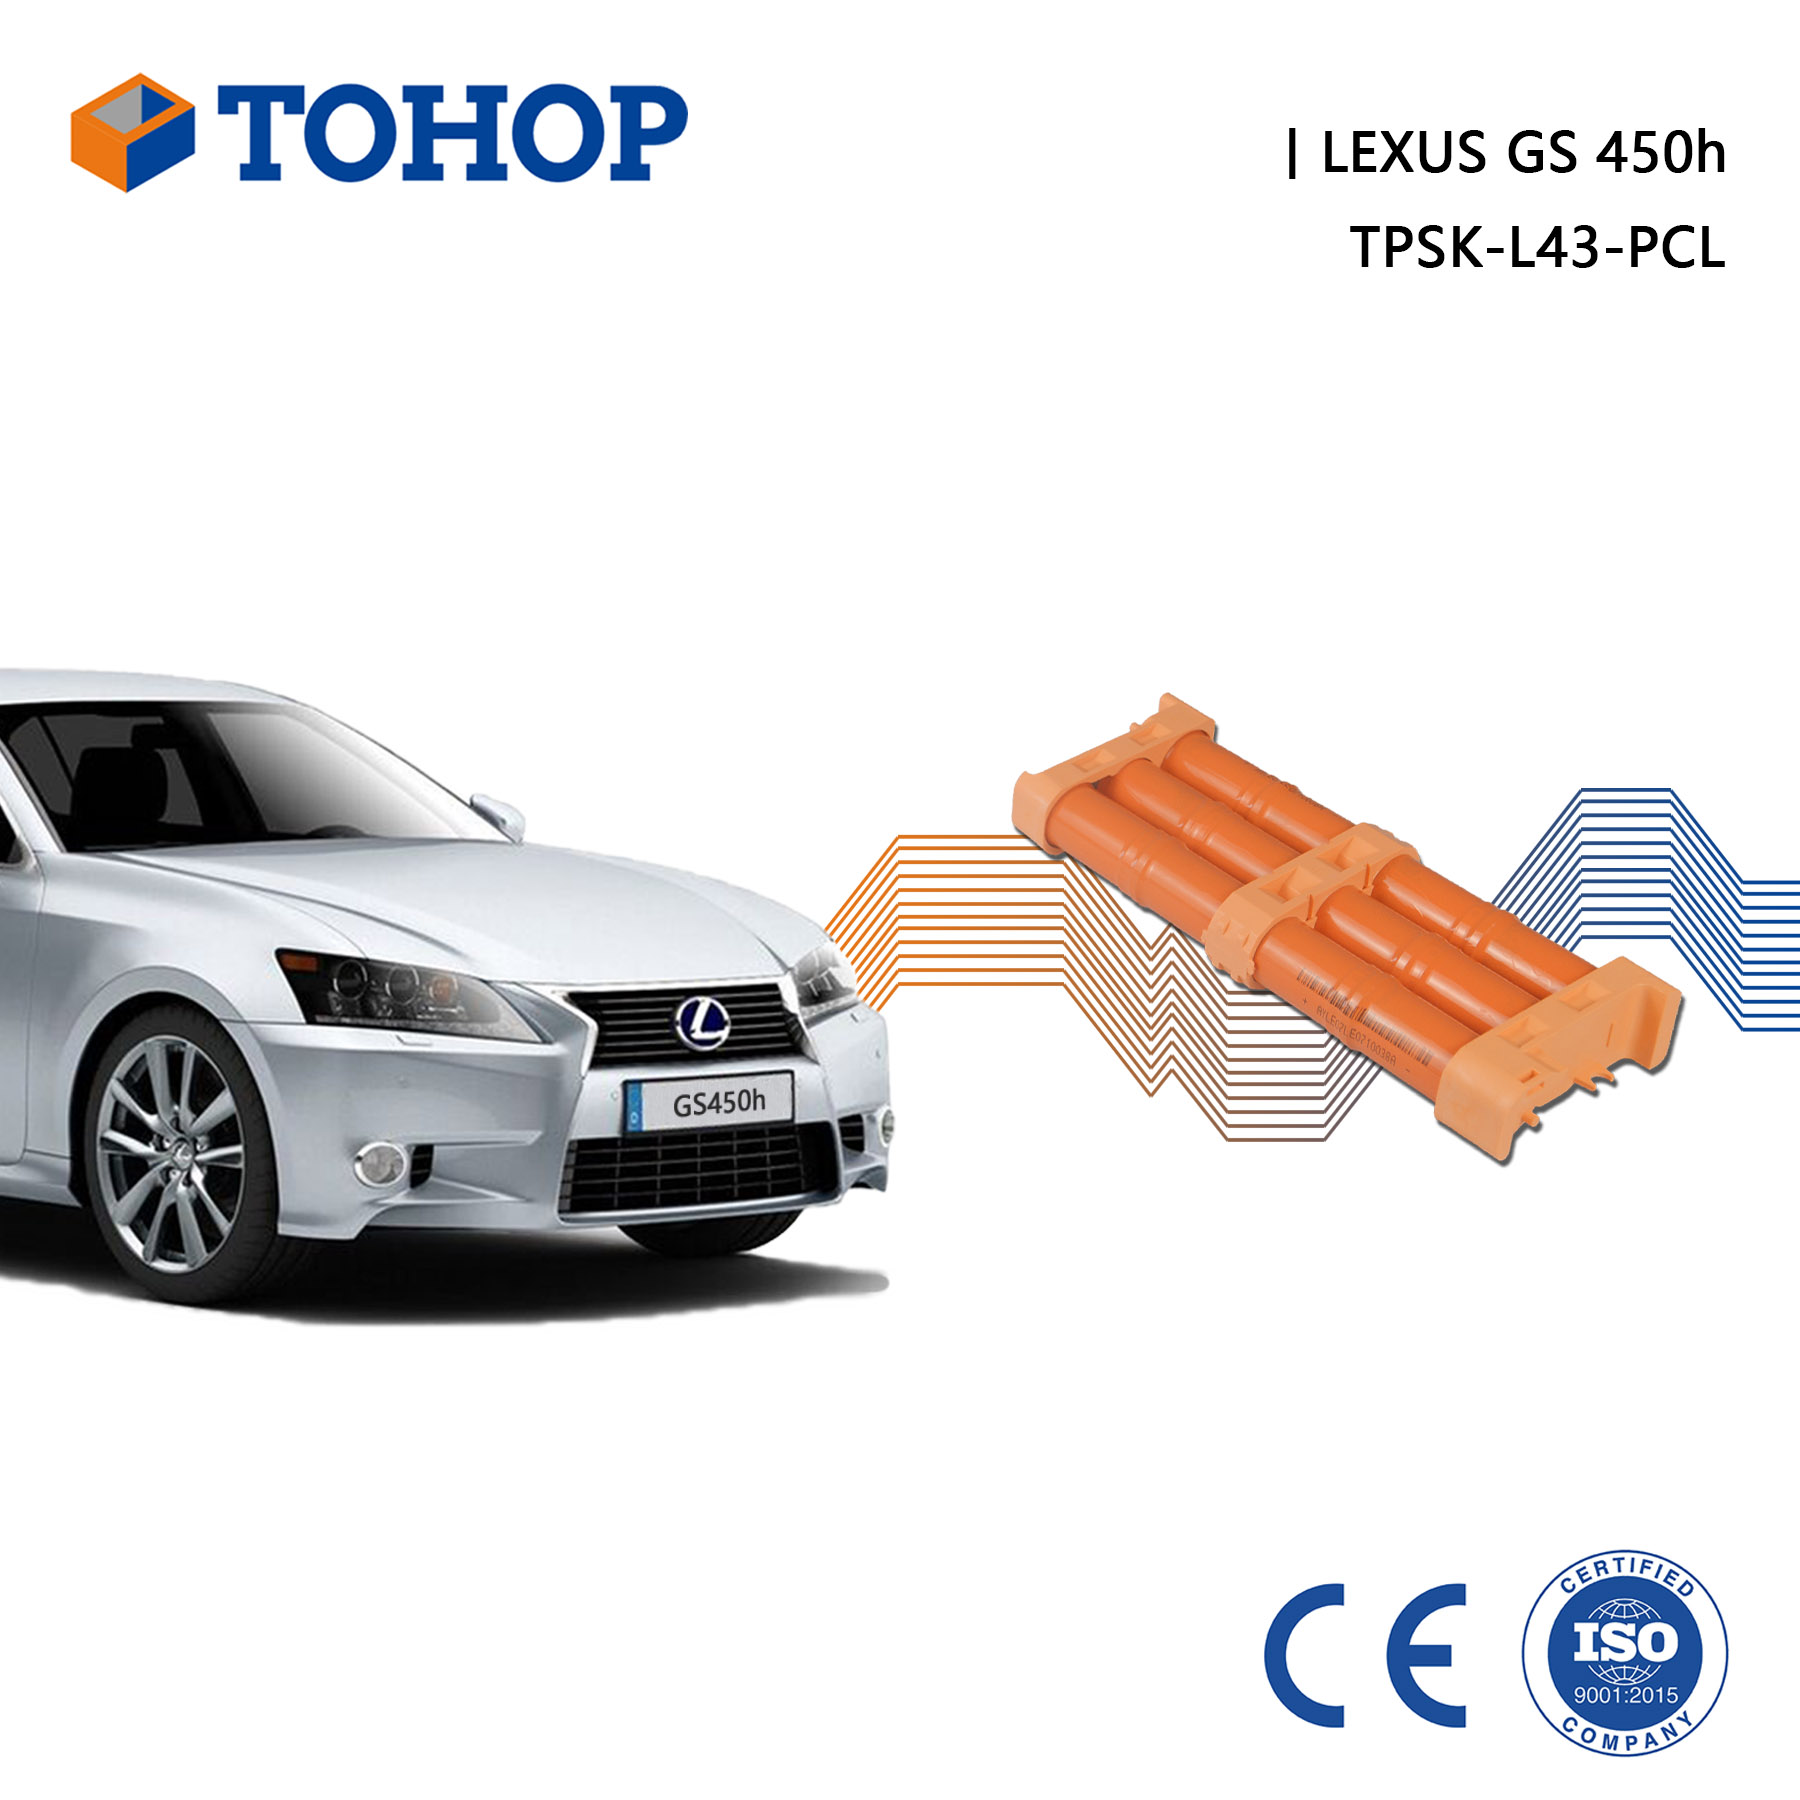 GS450h Cylindrical NI-Mh 6.5Ah Hybrid Car Battery Pack for Lexus